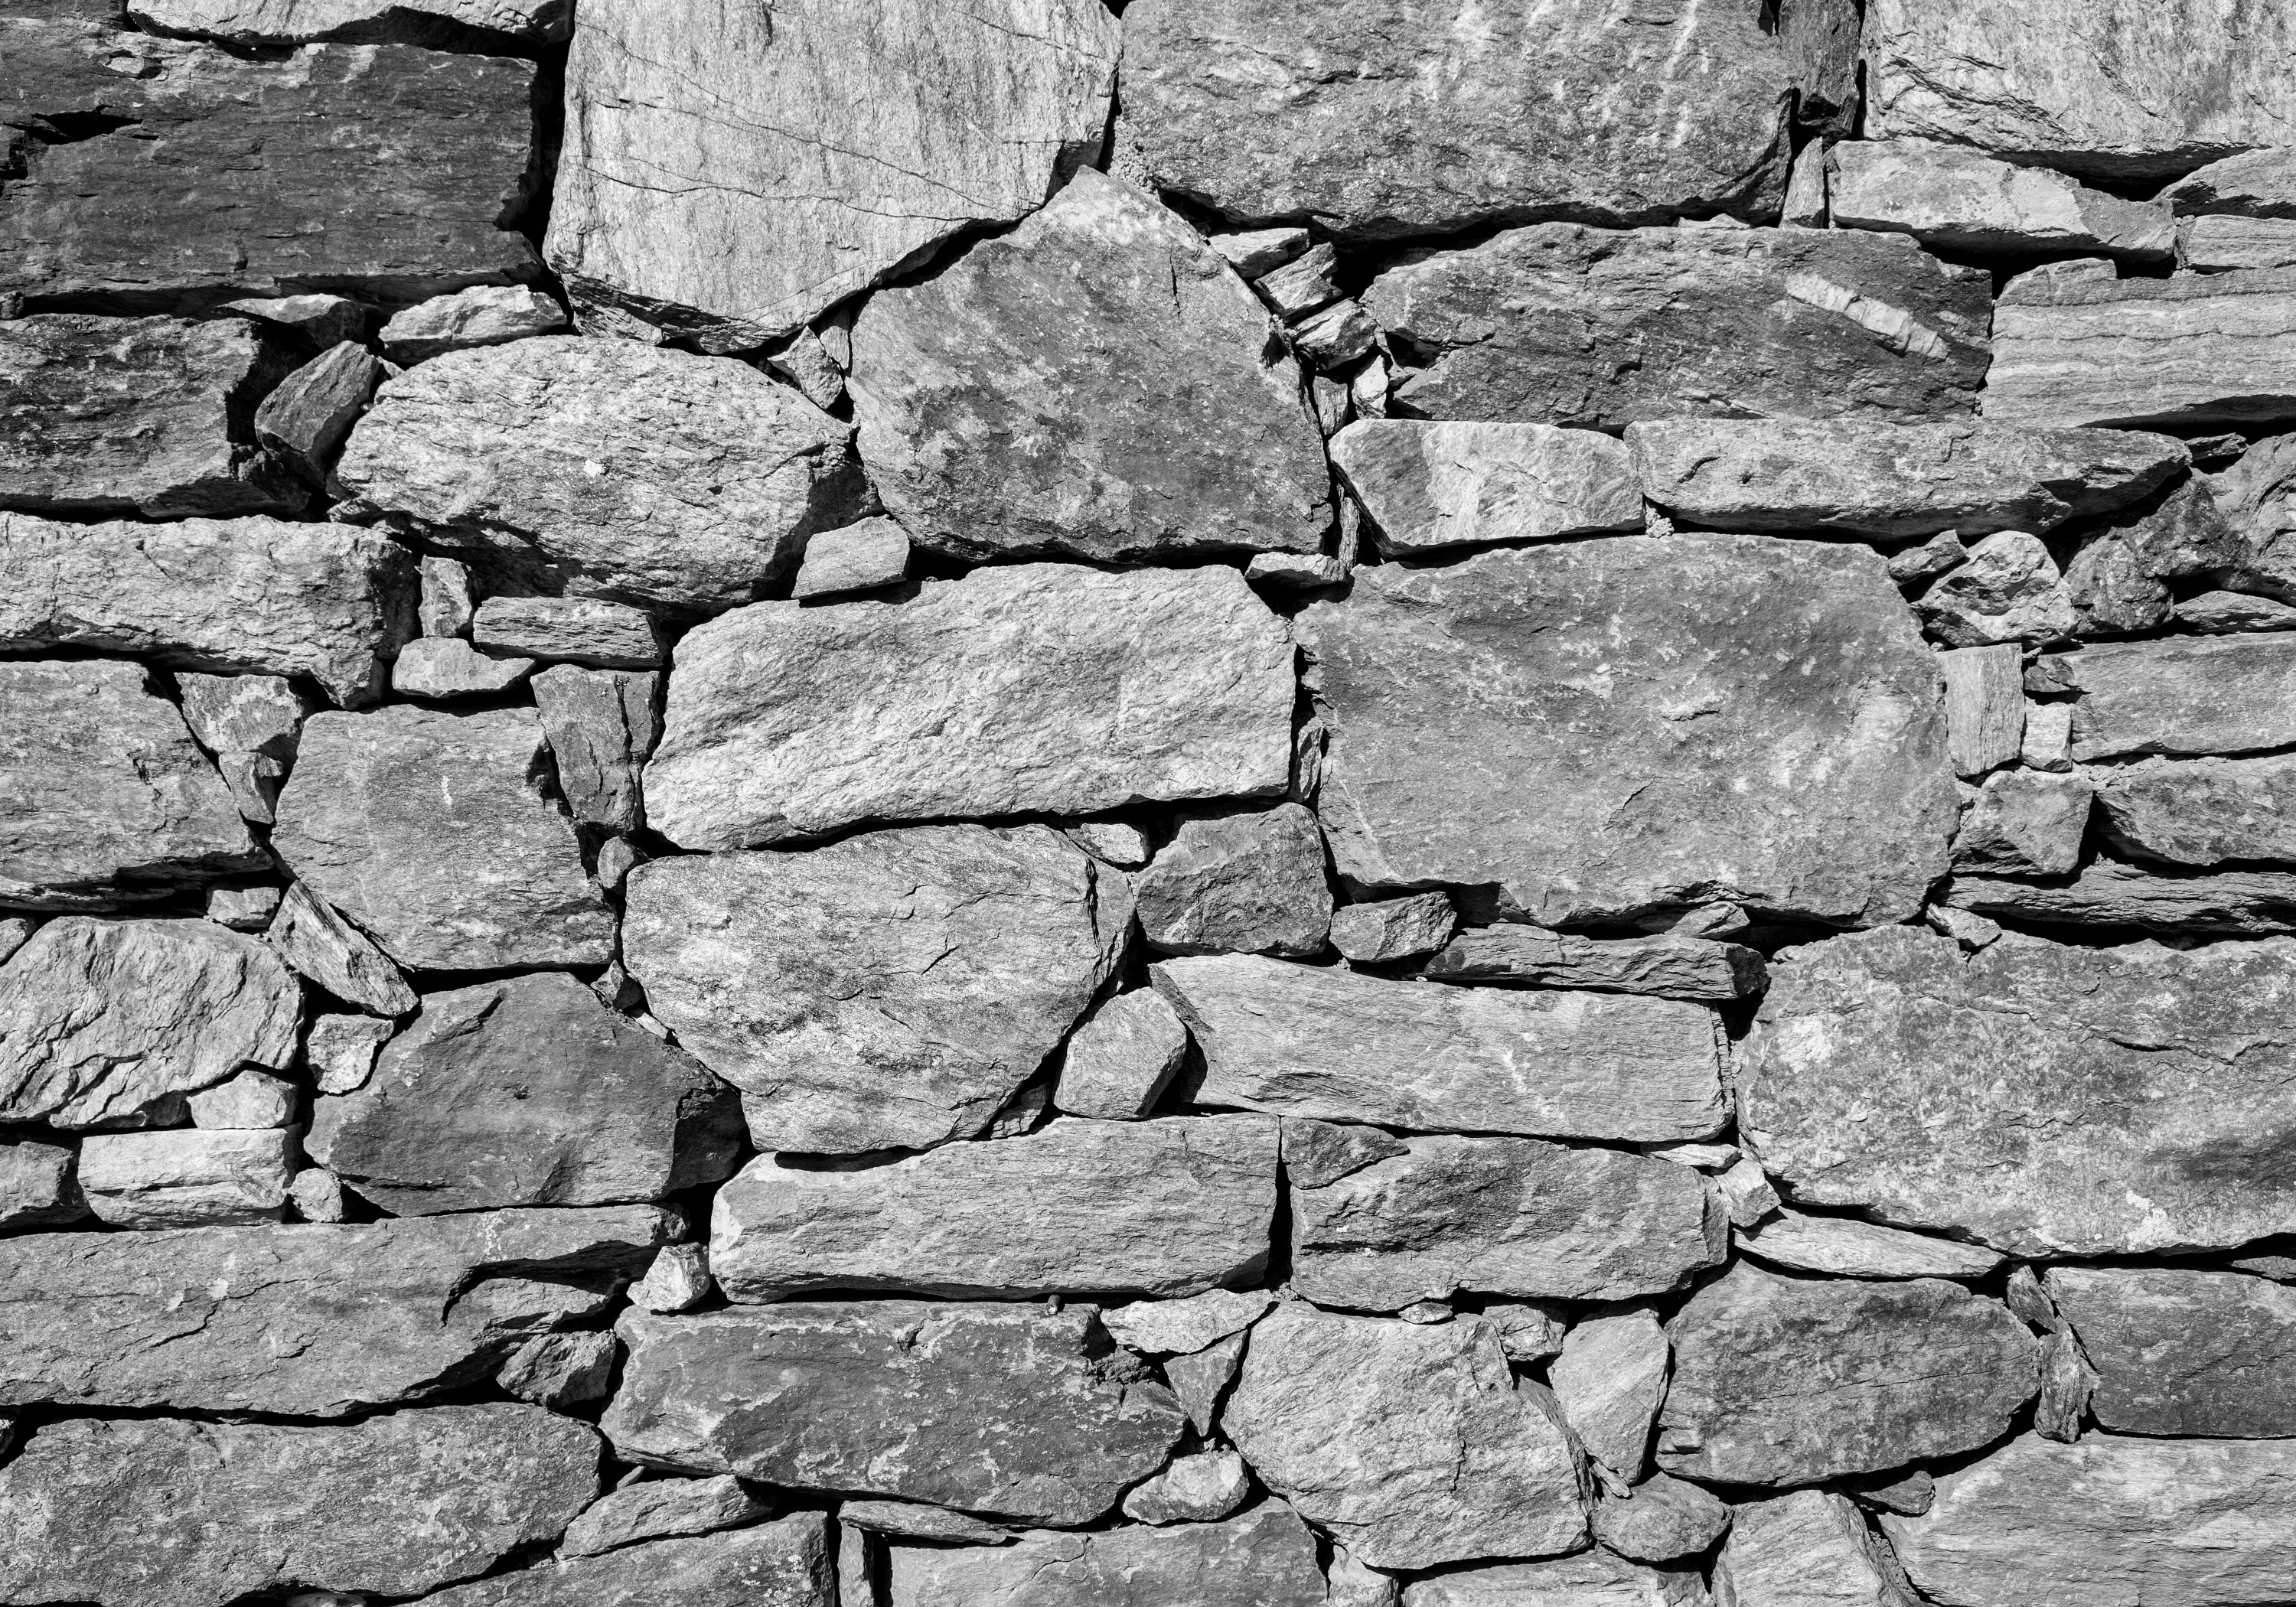 Black and White Stone Wall